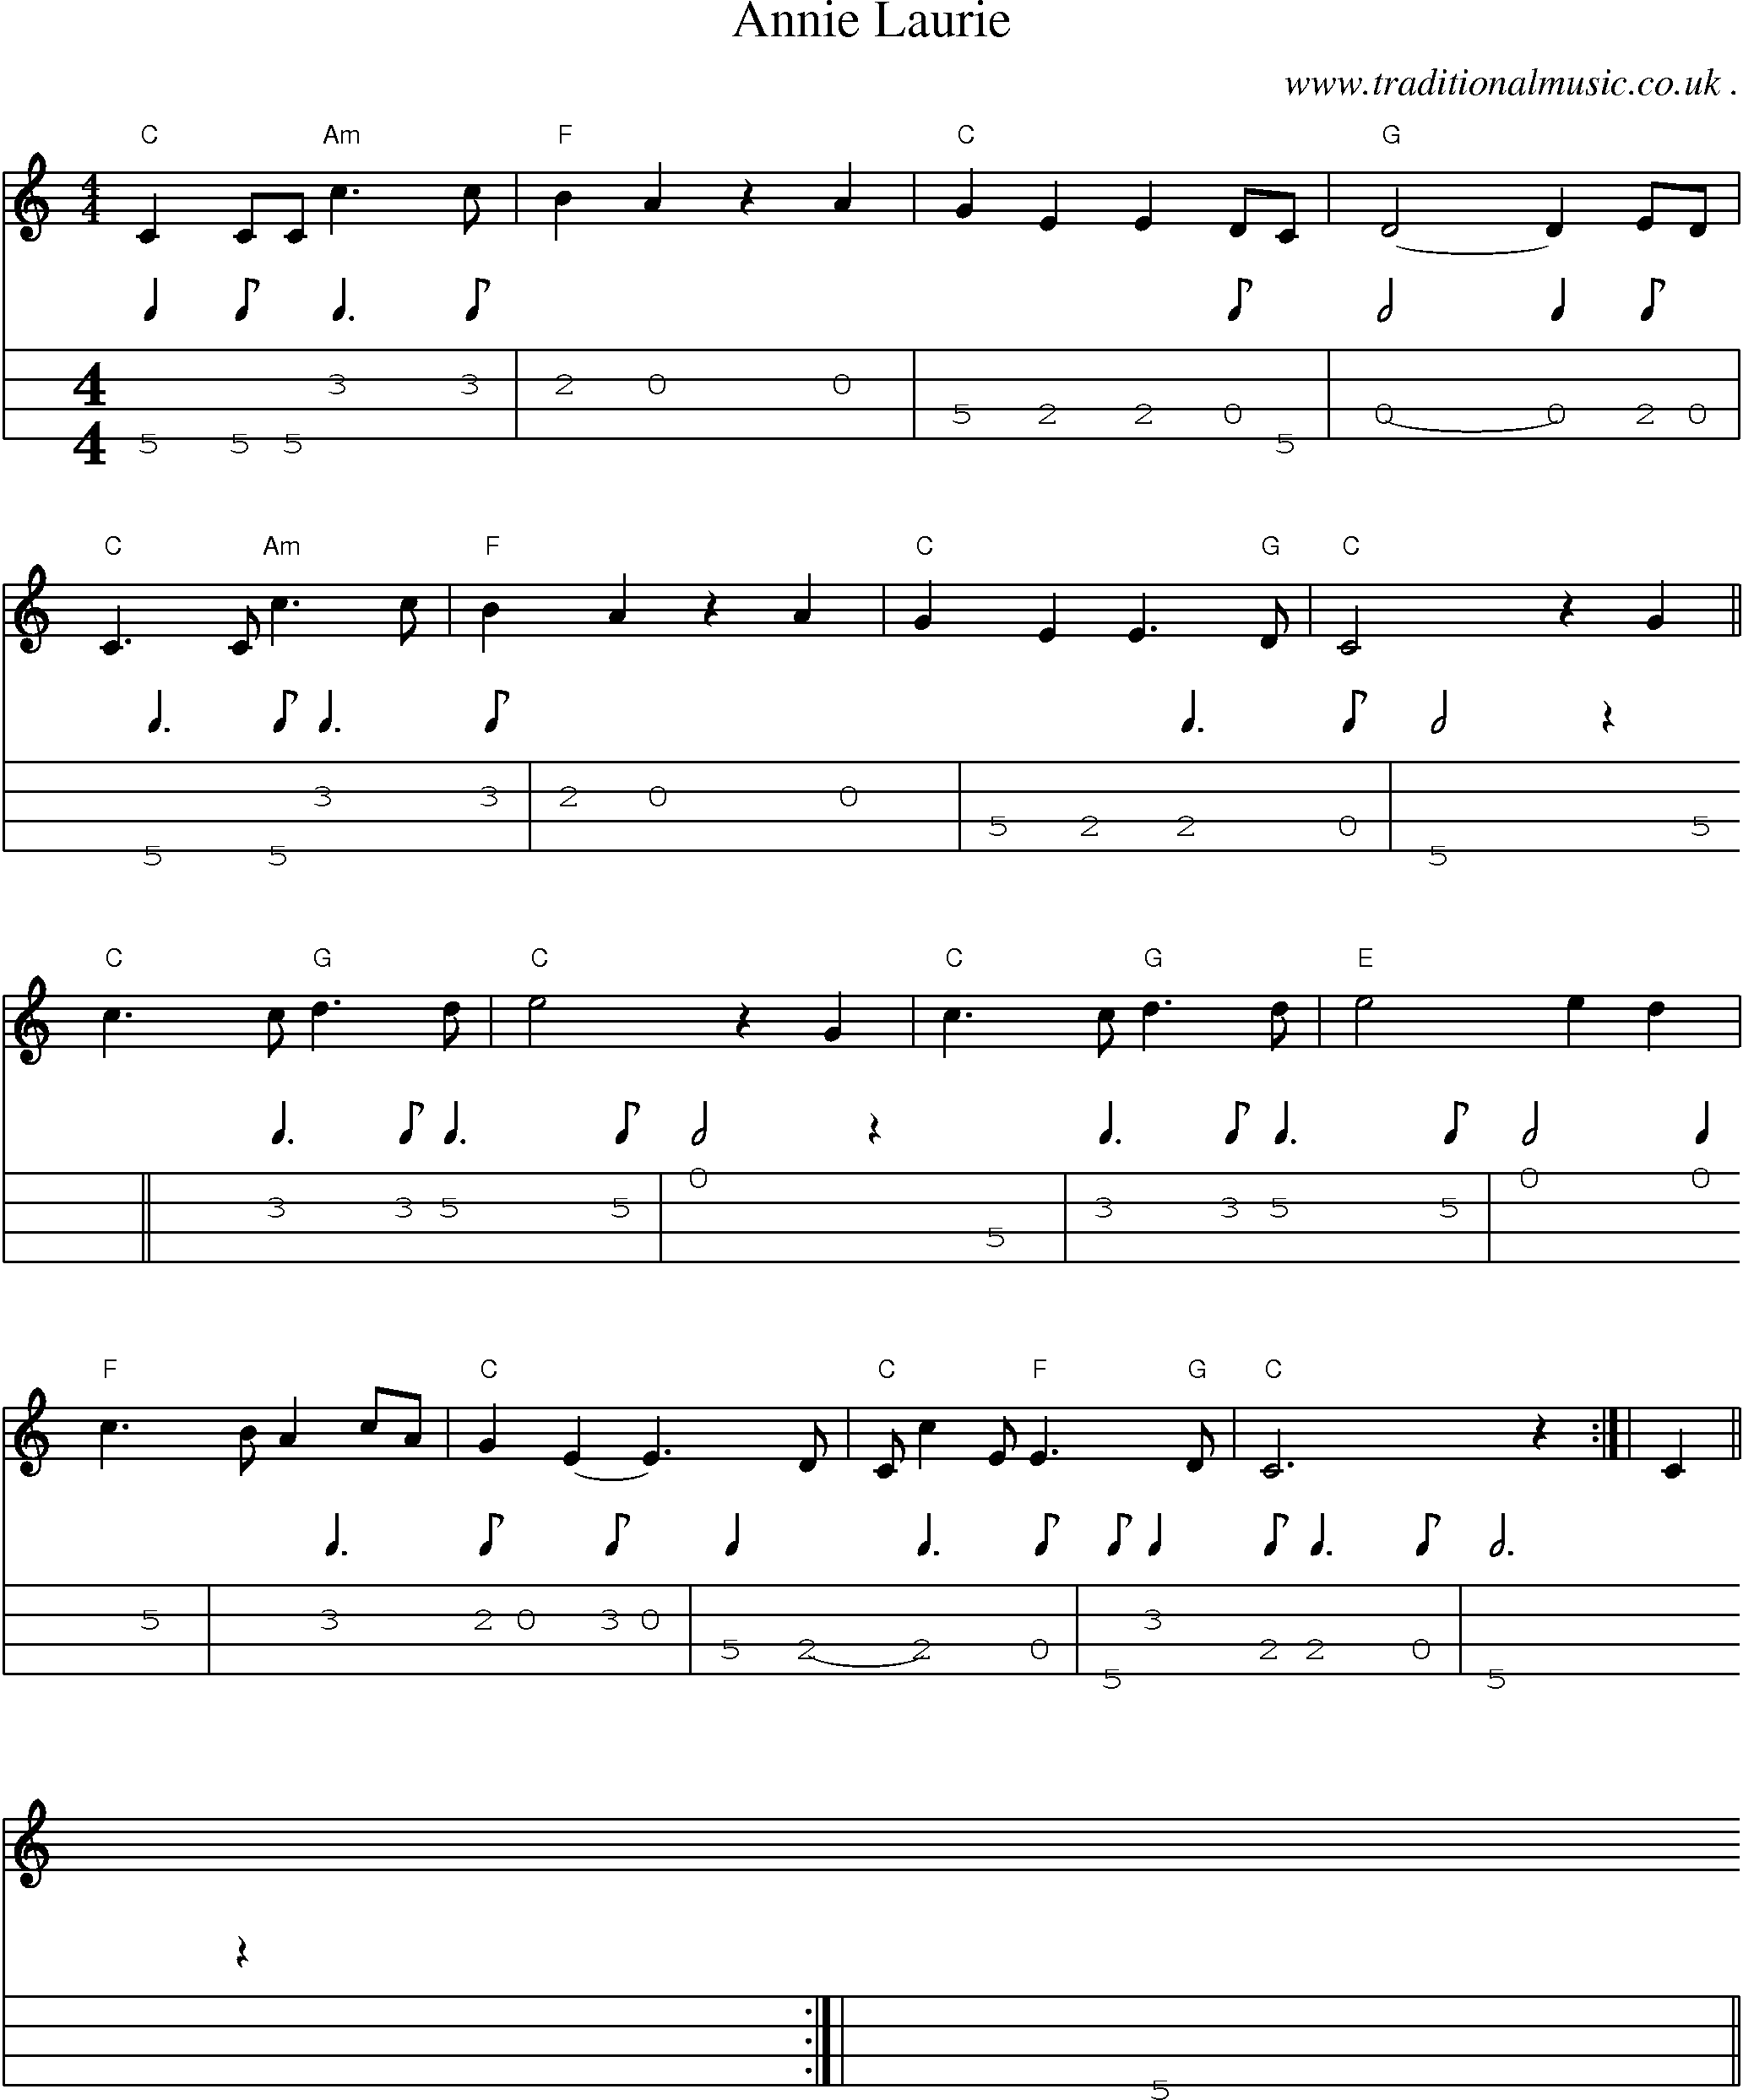 Sheet-music  score, Chords and Mandolin Tabs for Annie Laurie